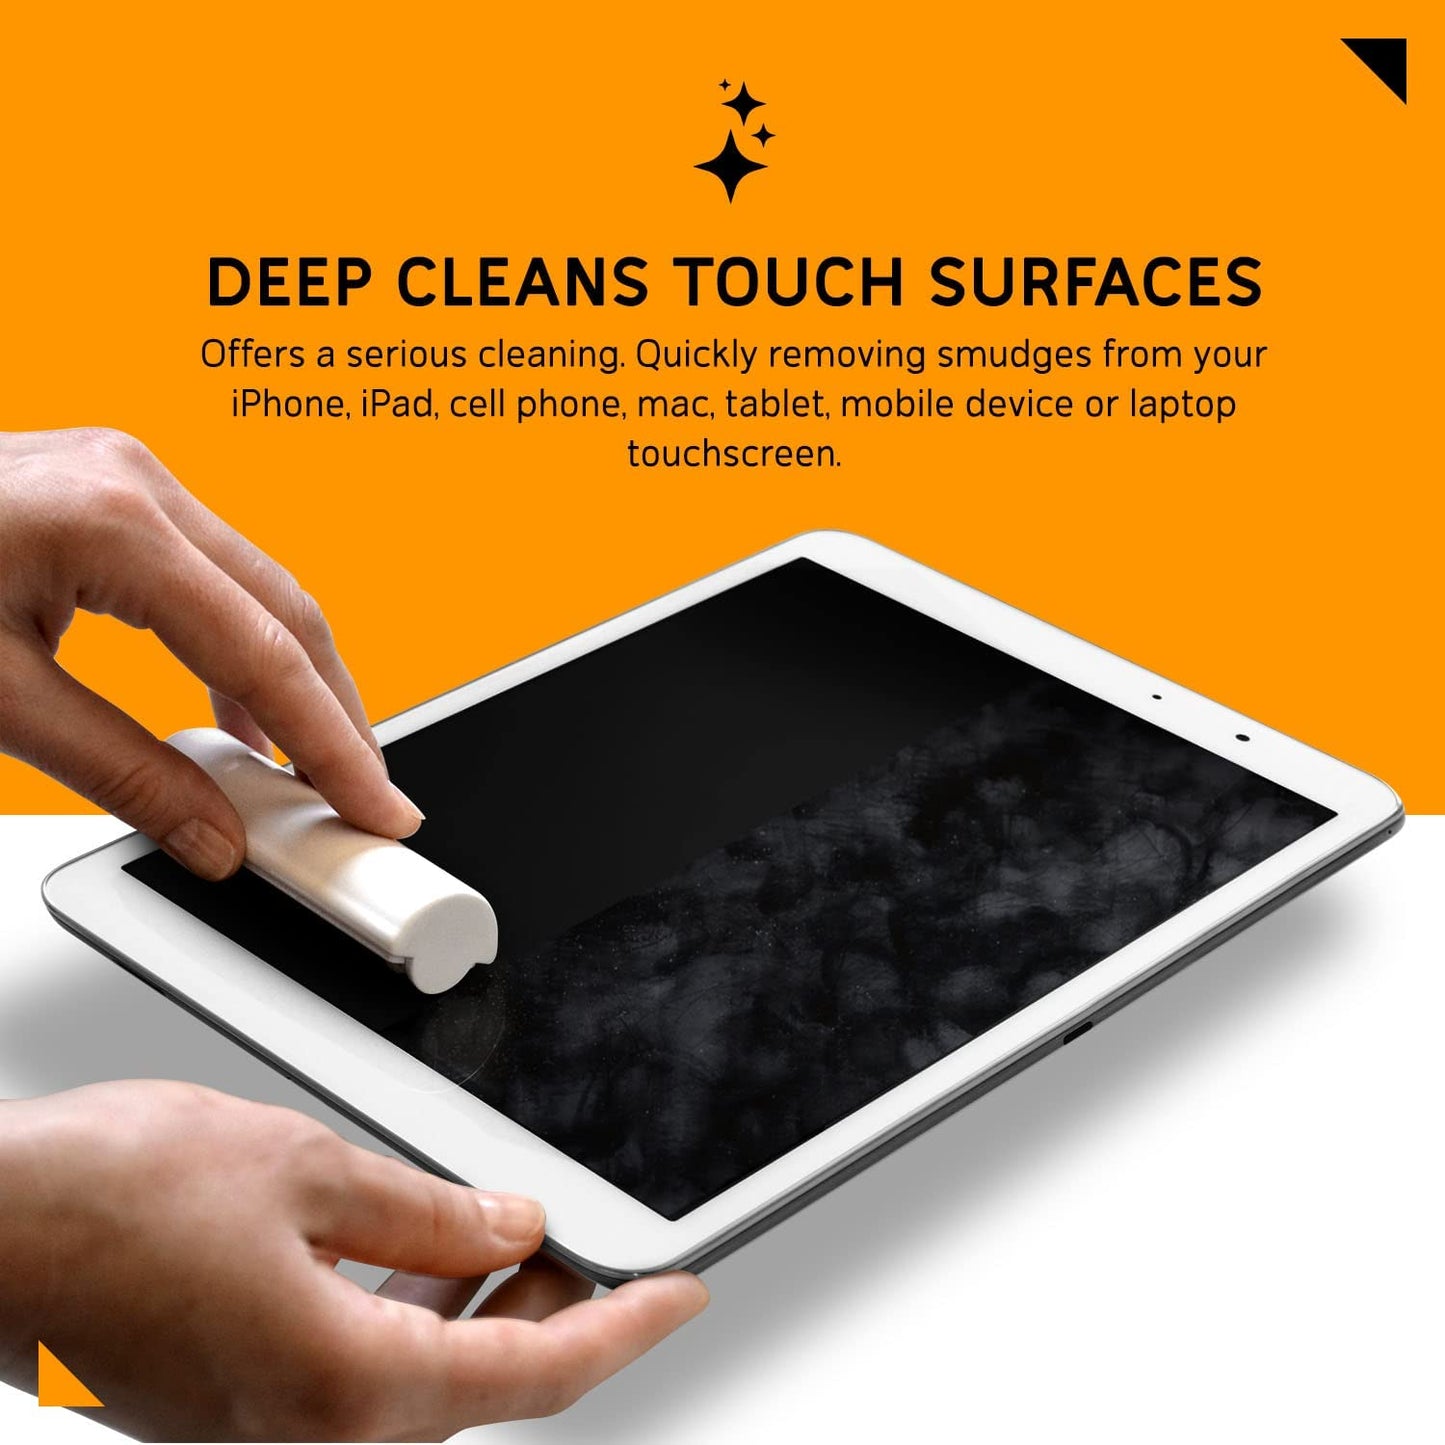 A hand is using an iroller screen cleaner to clean an iPad which is full of fingerprints.